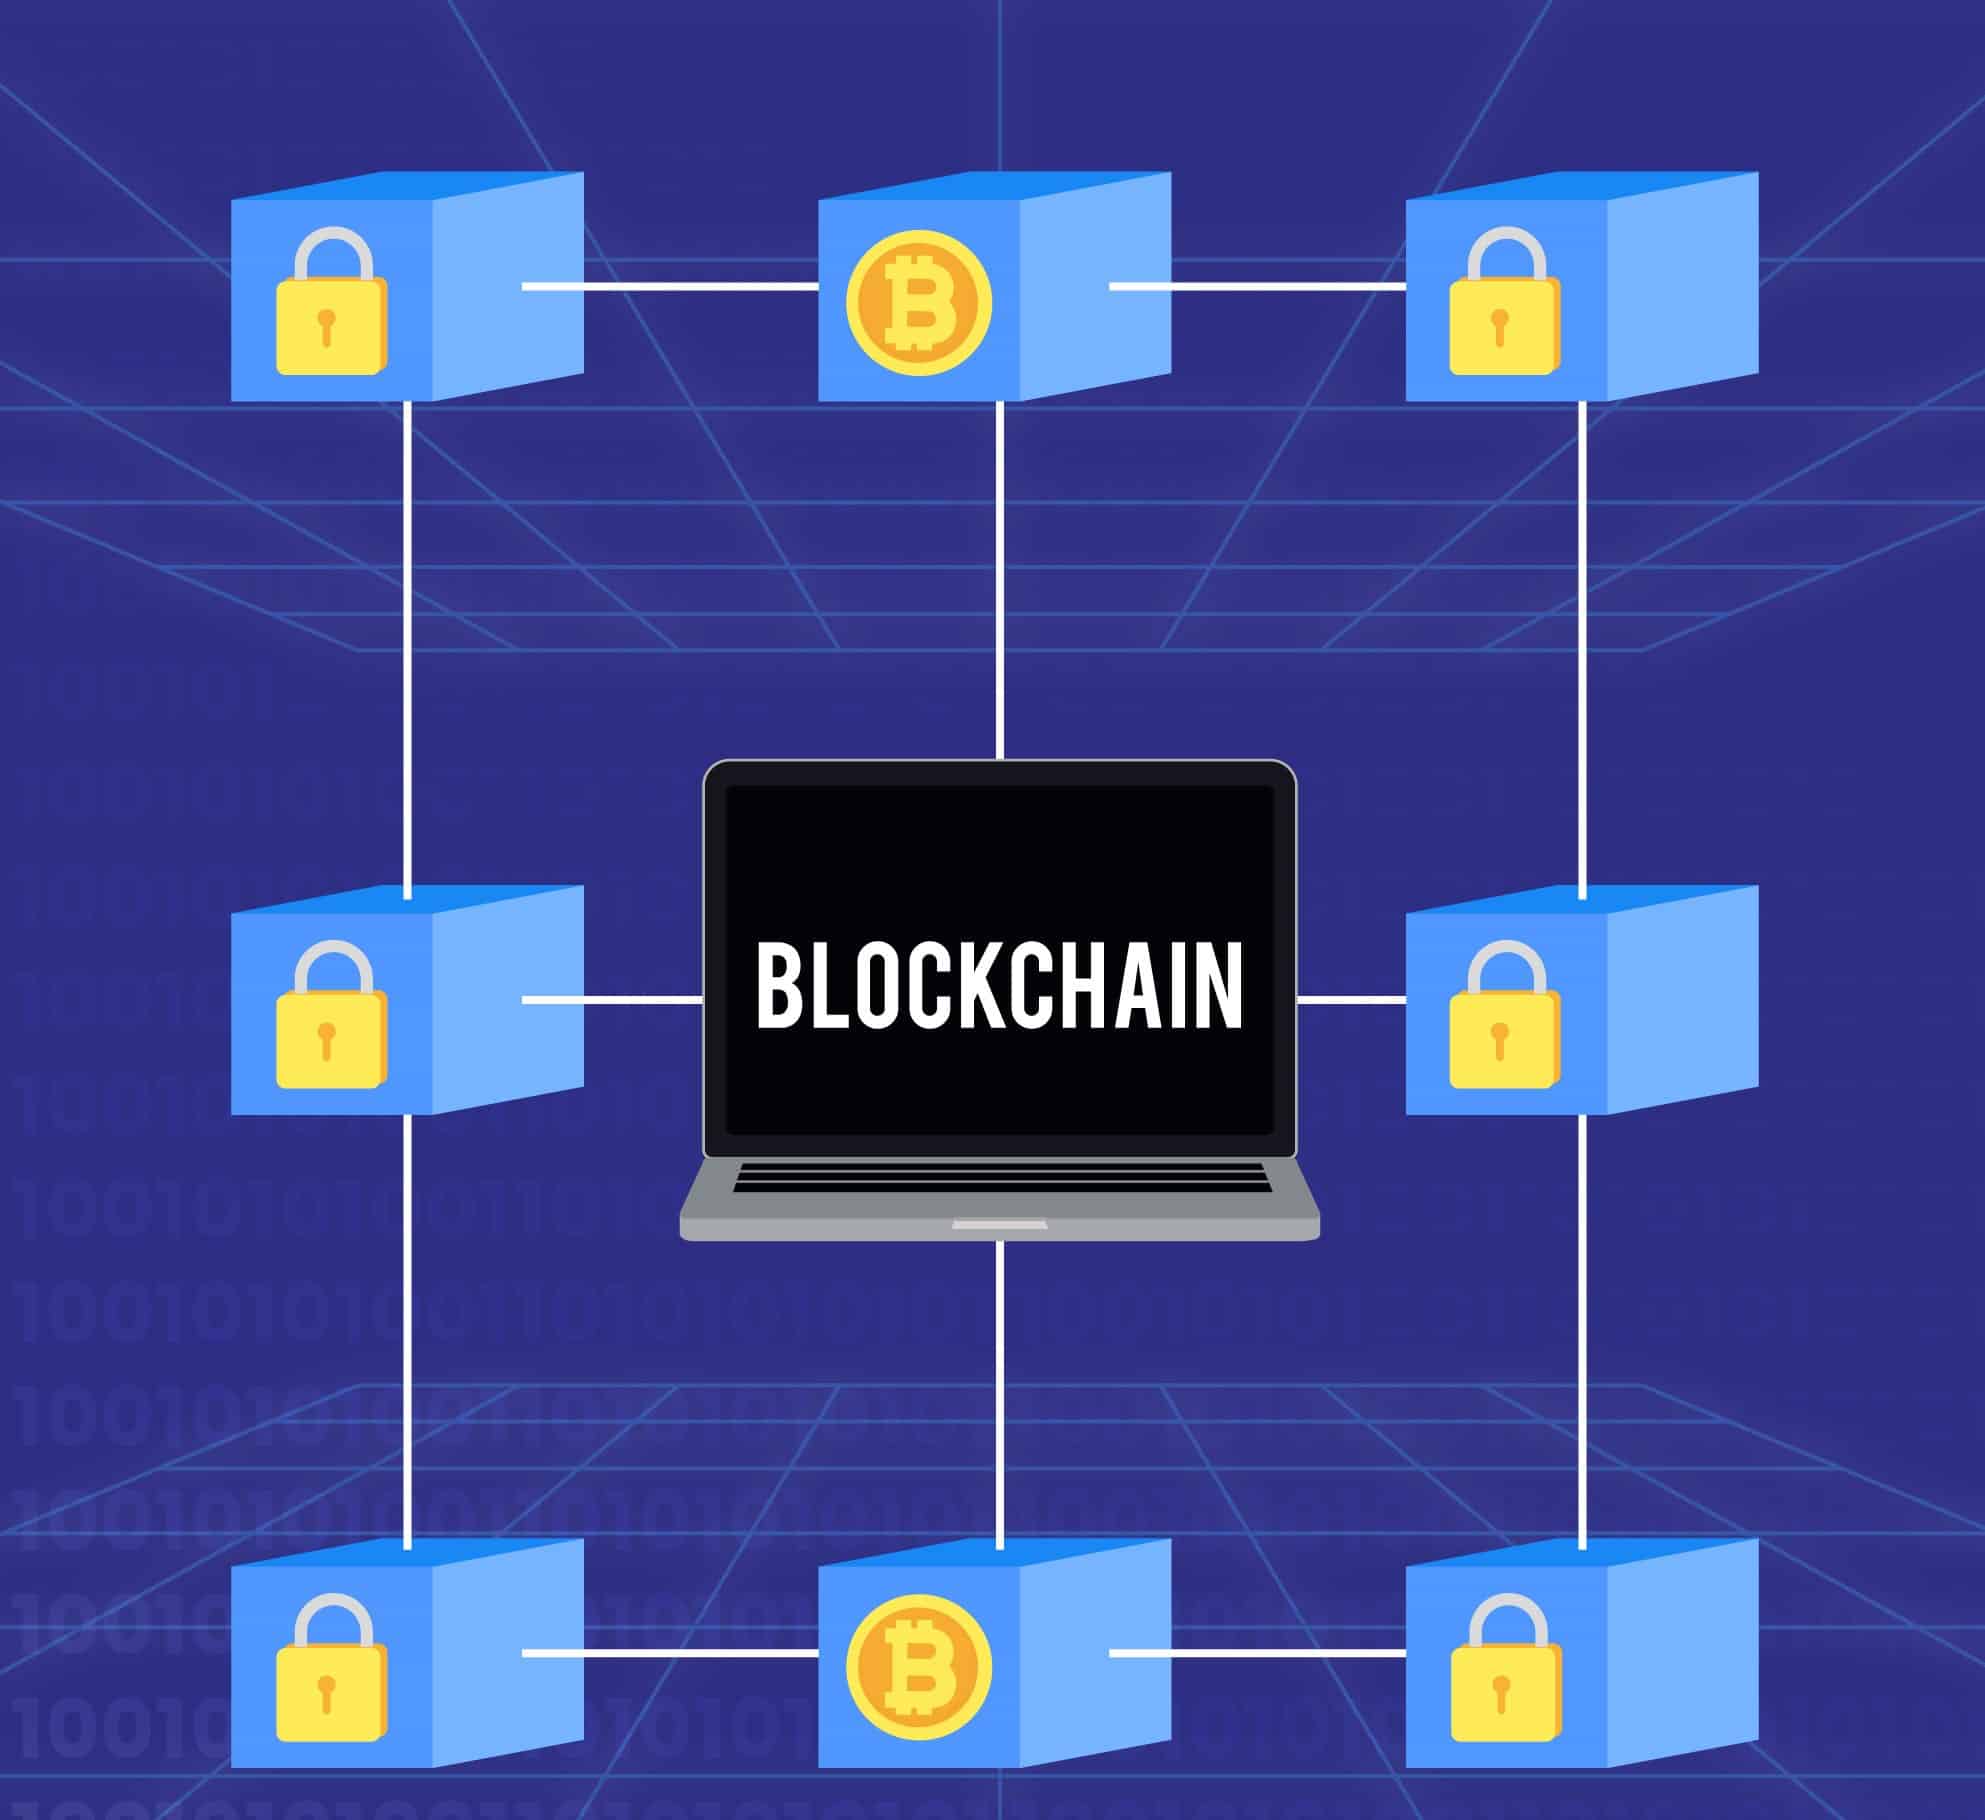 What Is the Blockchain Protocol?